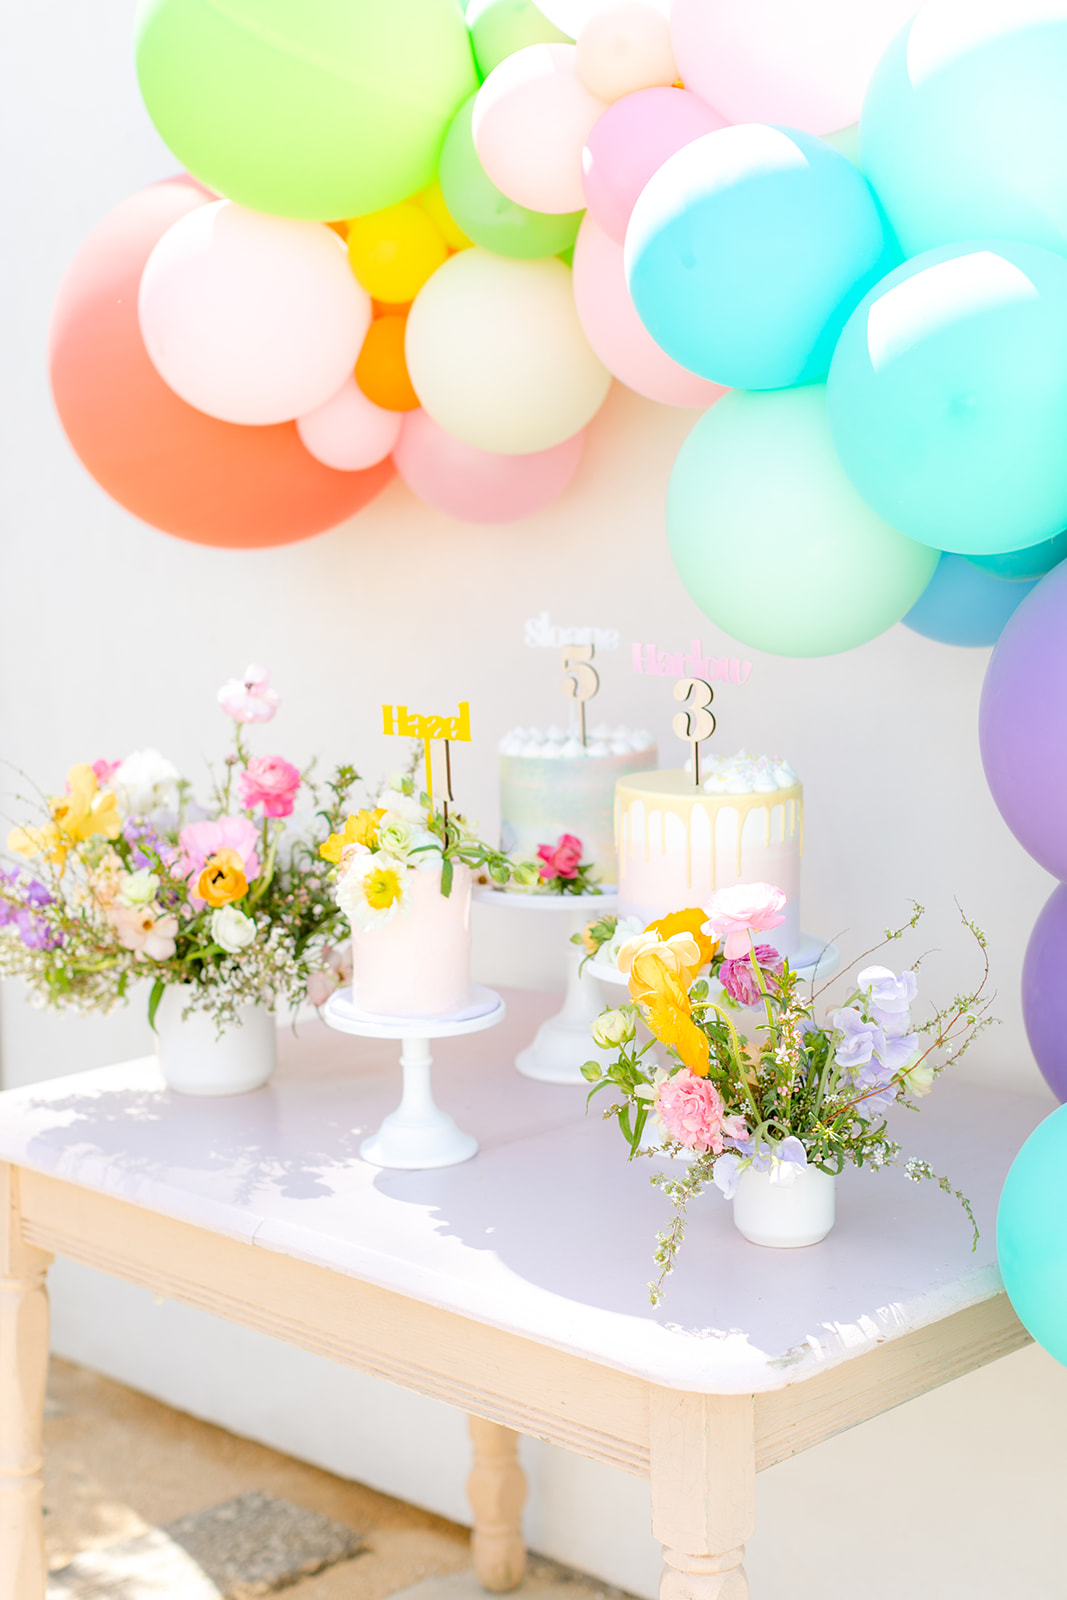 It’s all Cupcakes and Rainbows with this Colorful Trolls Birthday Party ...